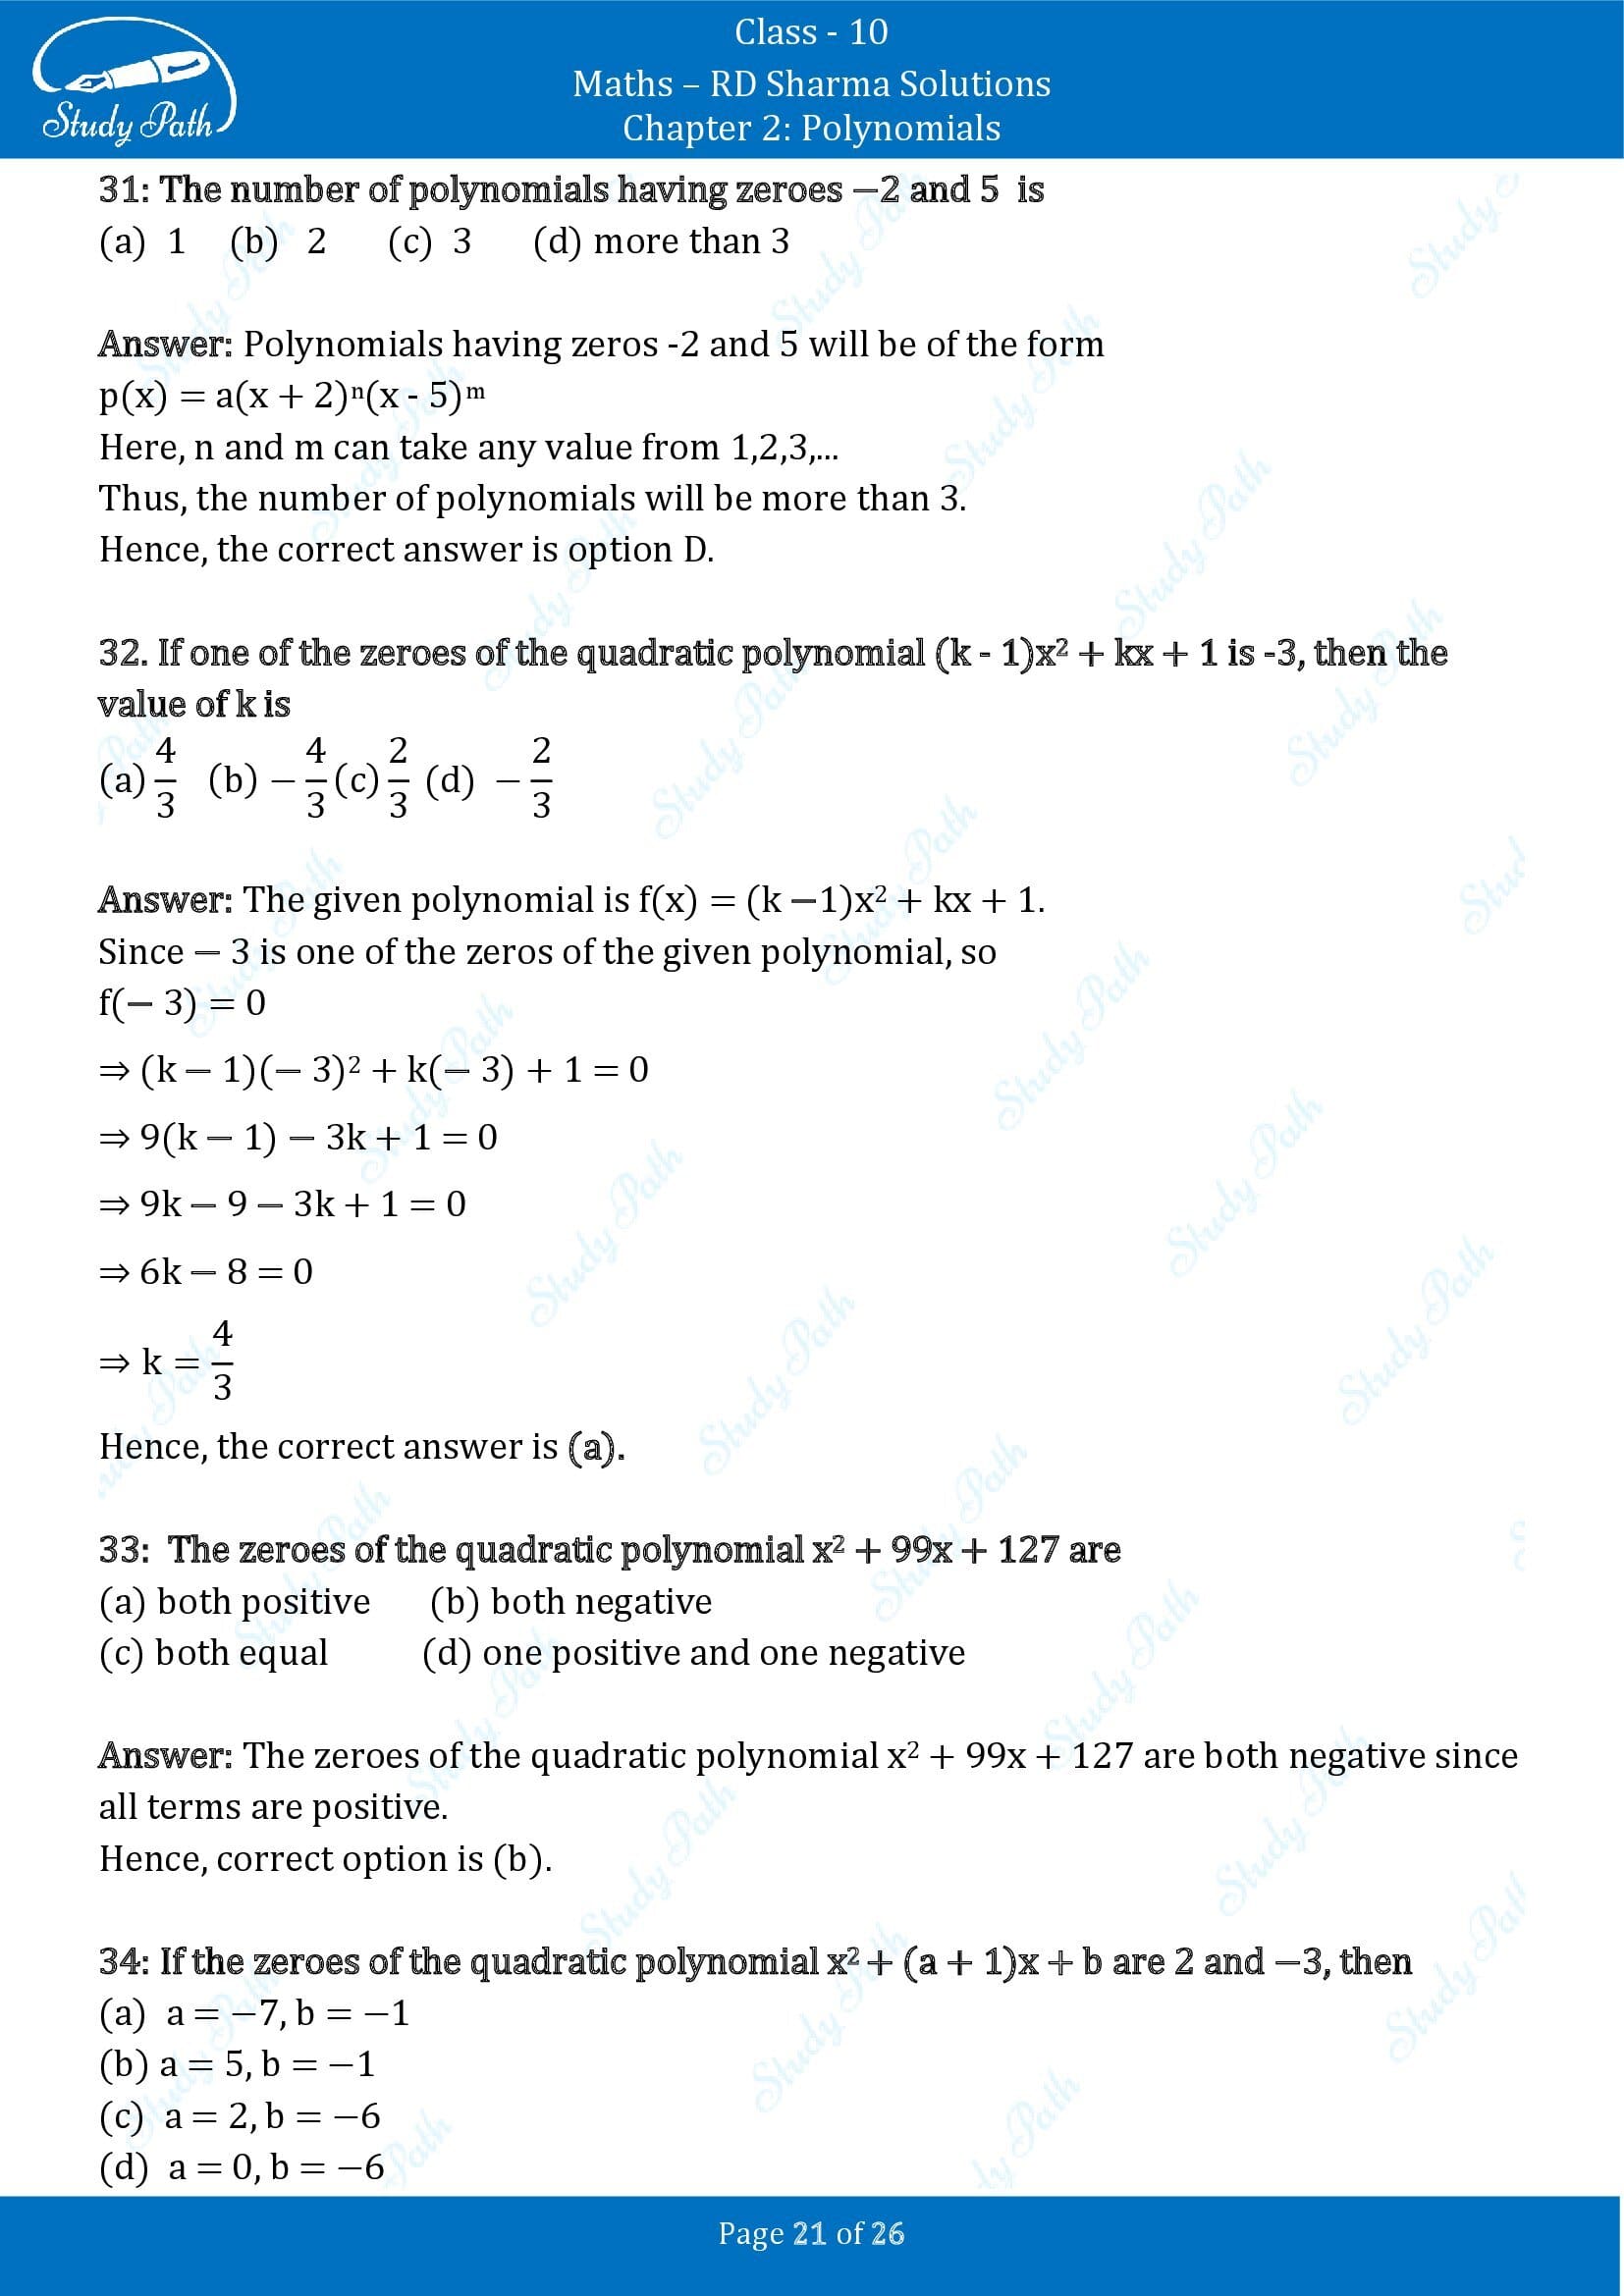 RD Sharma Solutions Class 10 Chapter 2 Polynomials Multiple Choice Questions MCQs 00021